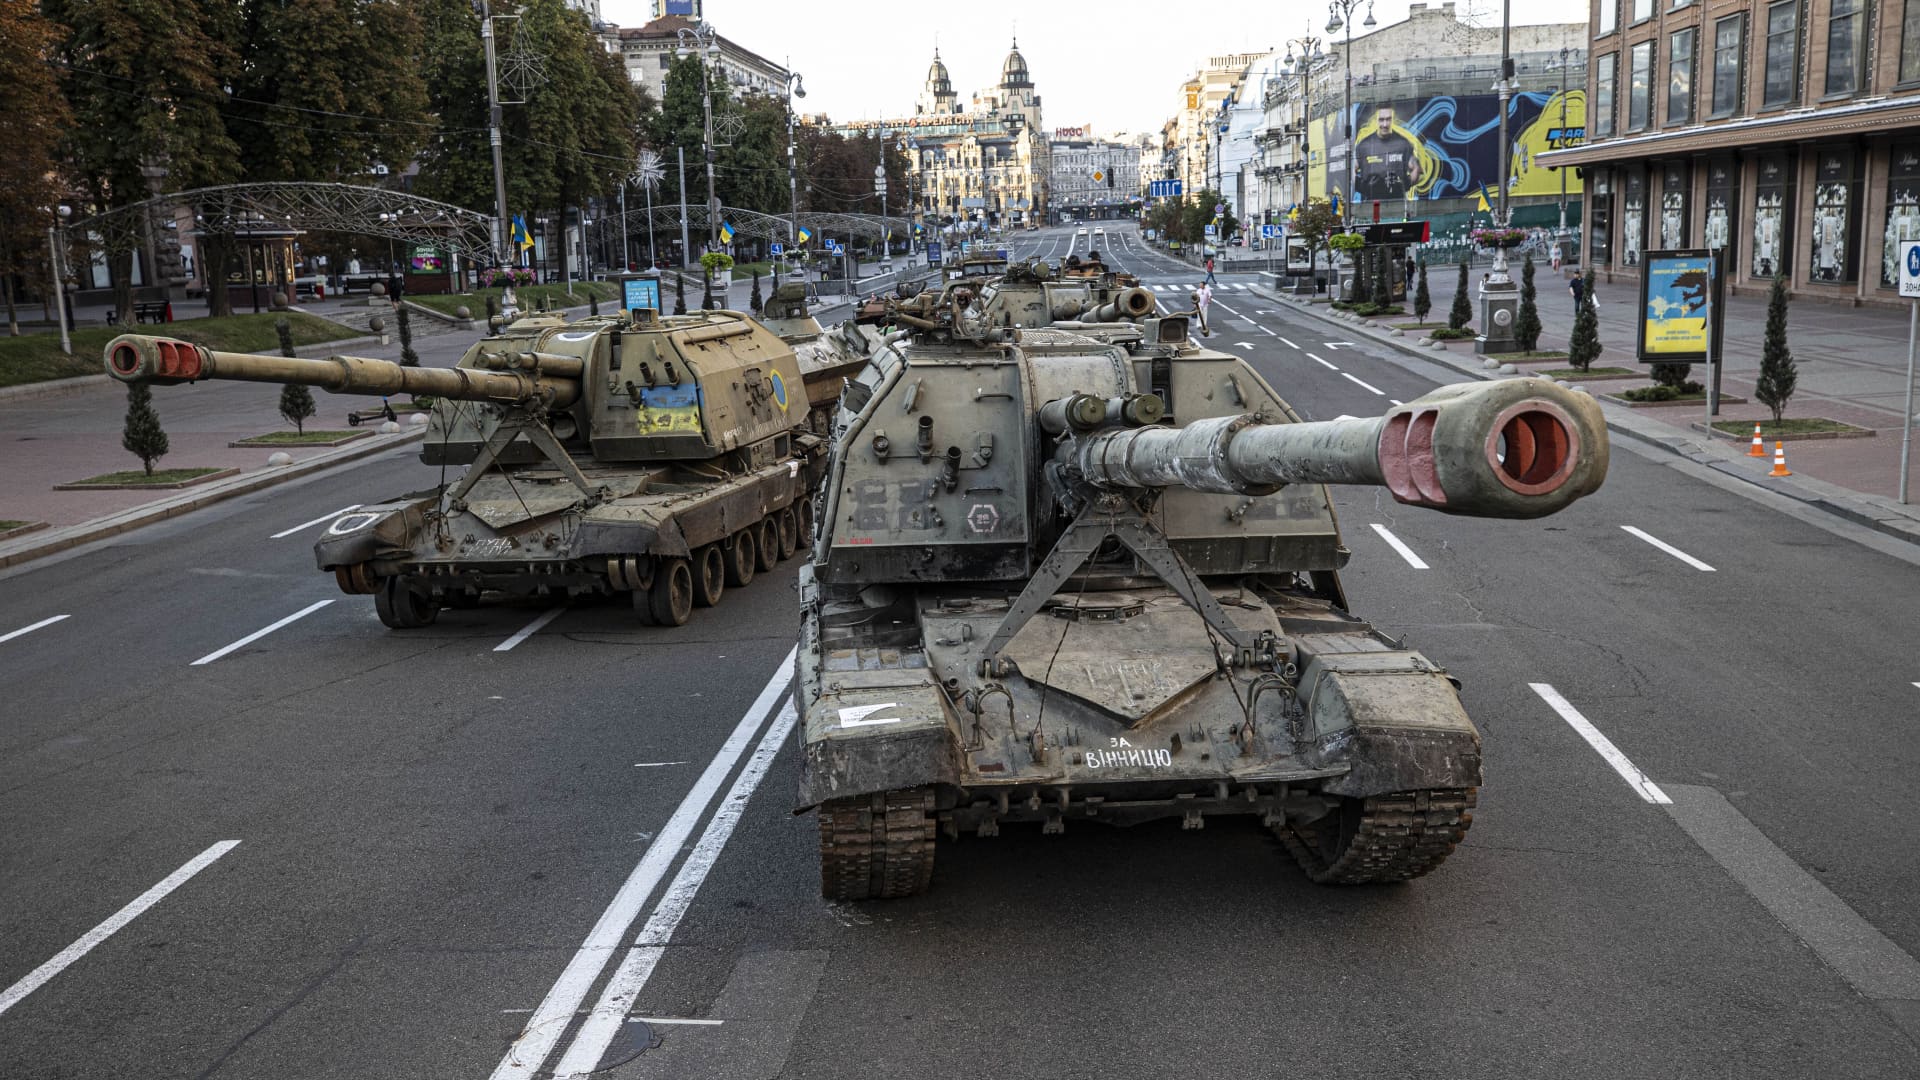 Damaged military vehicles captured from Russian army on display at the Khreschatyk Street in Kyiv, Ukraine on August 25, 2022.